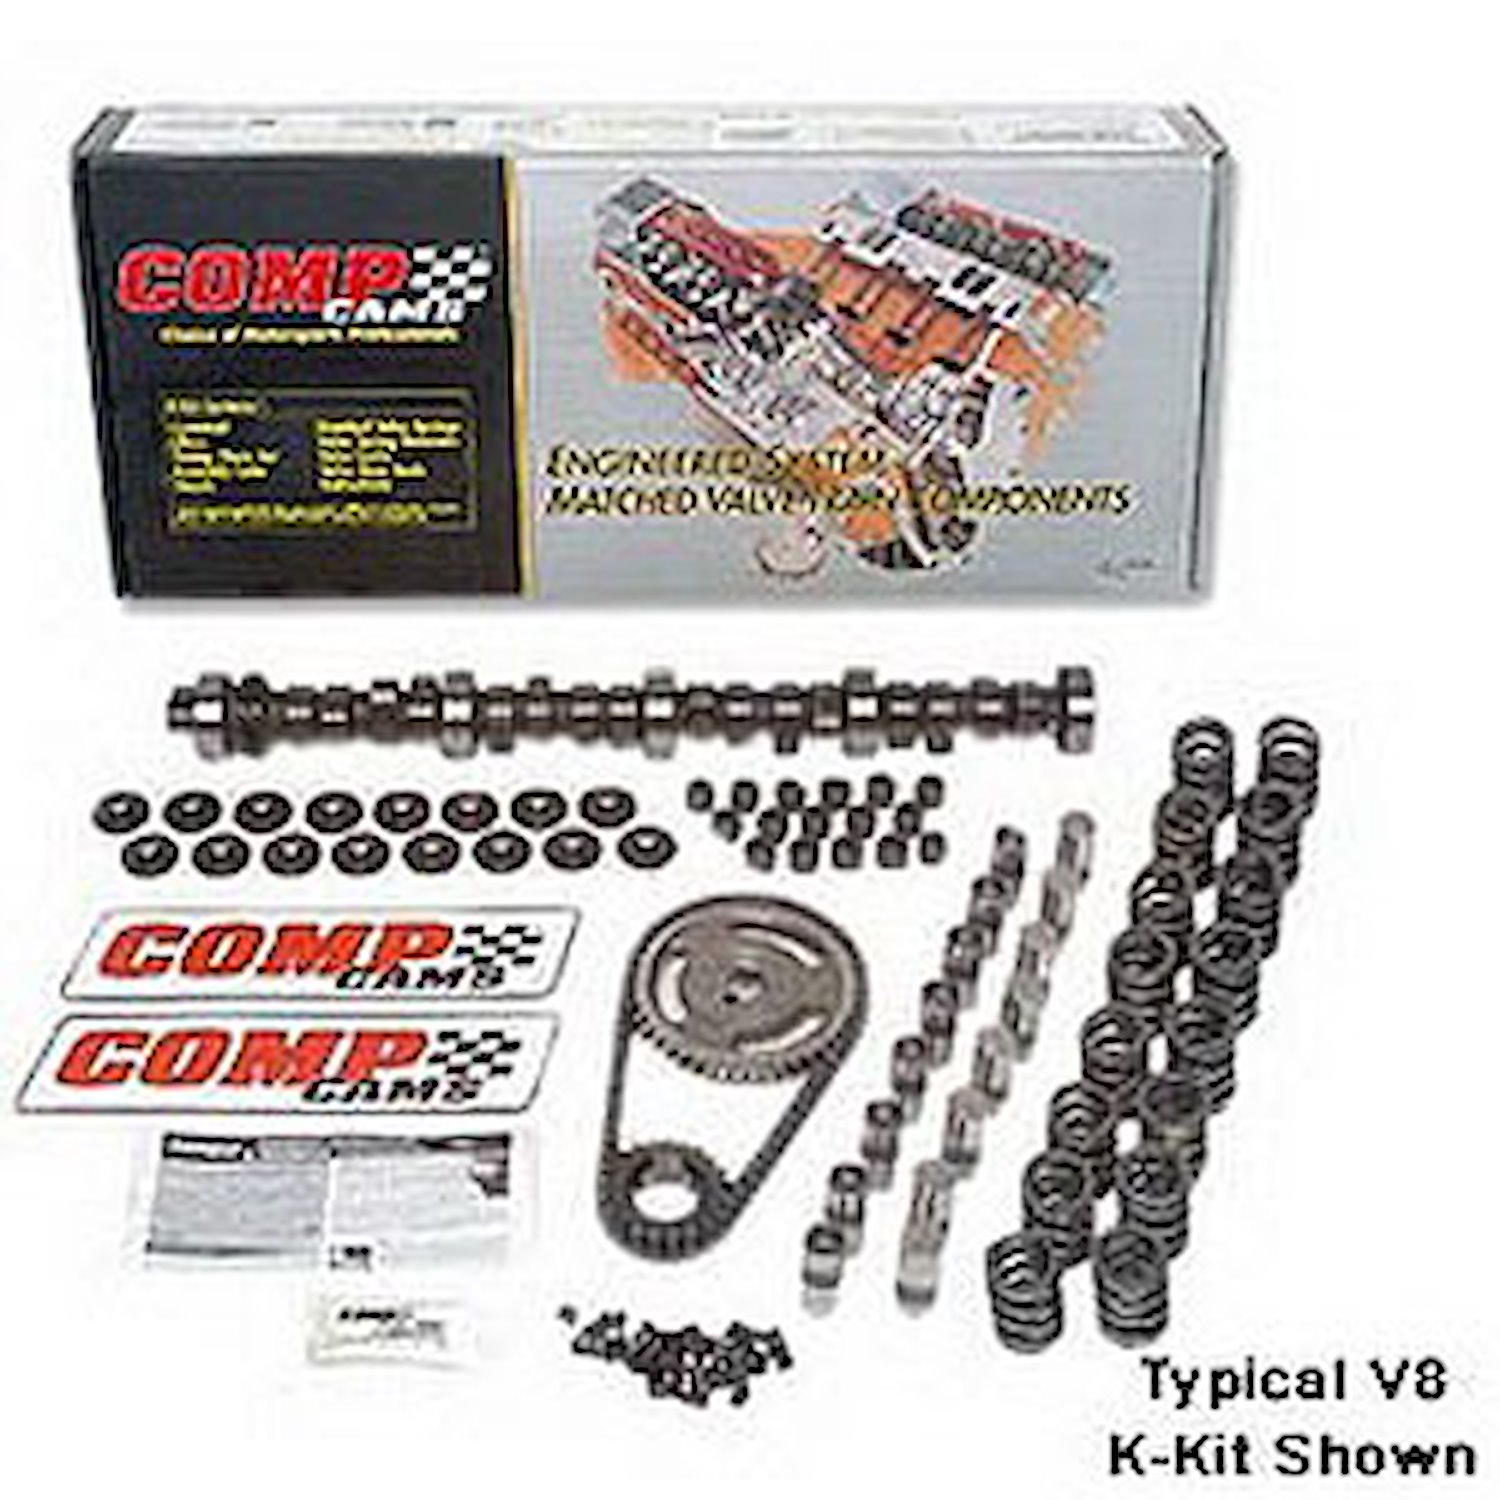 High Energy 252H Hydraulic Flat Tappet Camshaft Complete Kit Lift: .425" /.425" Duration: 252°/252° RPM Range: 800-4800